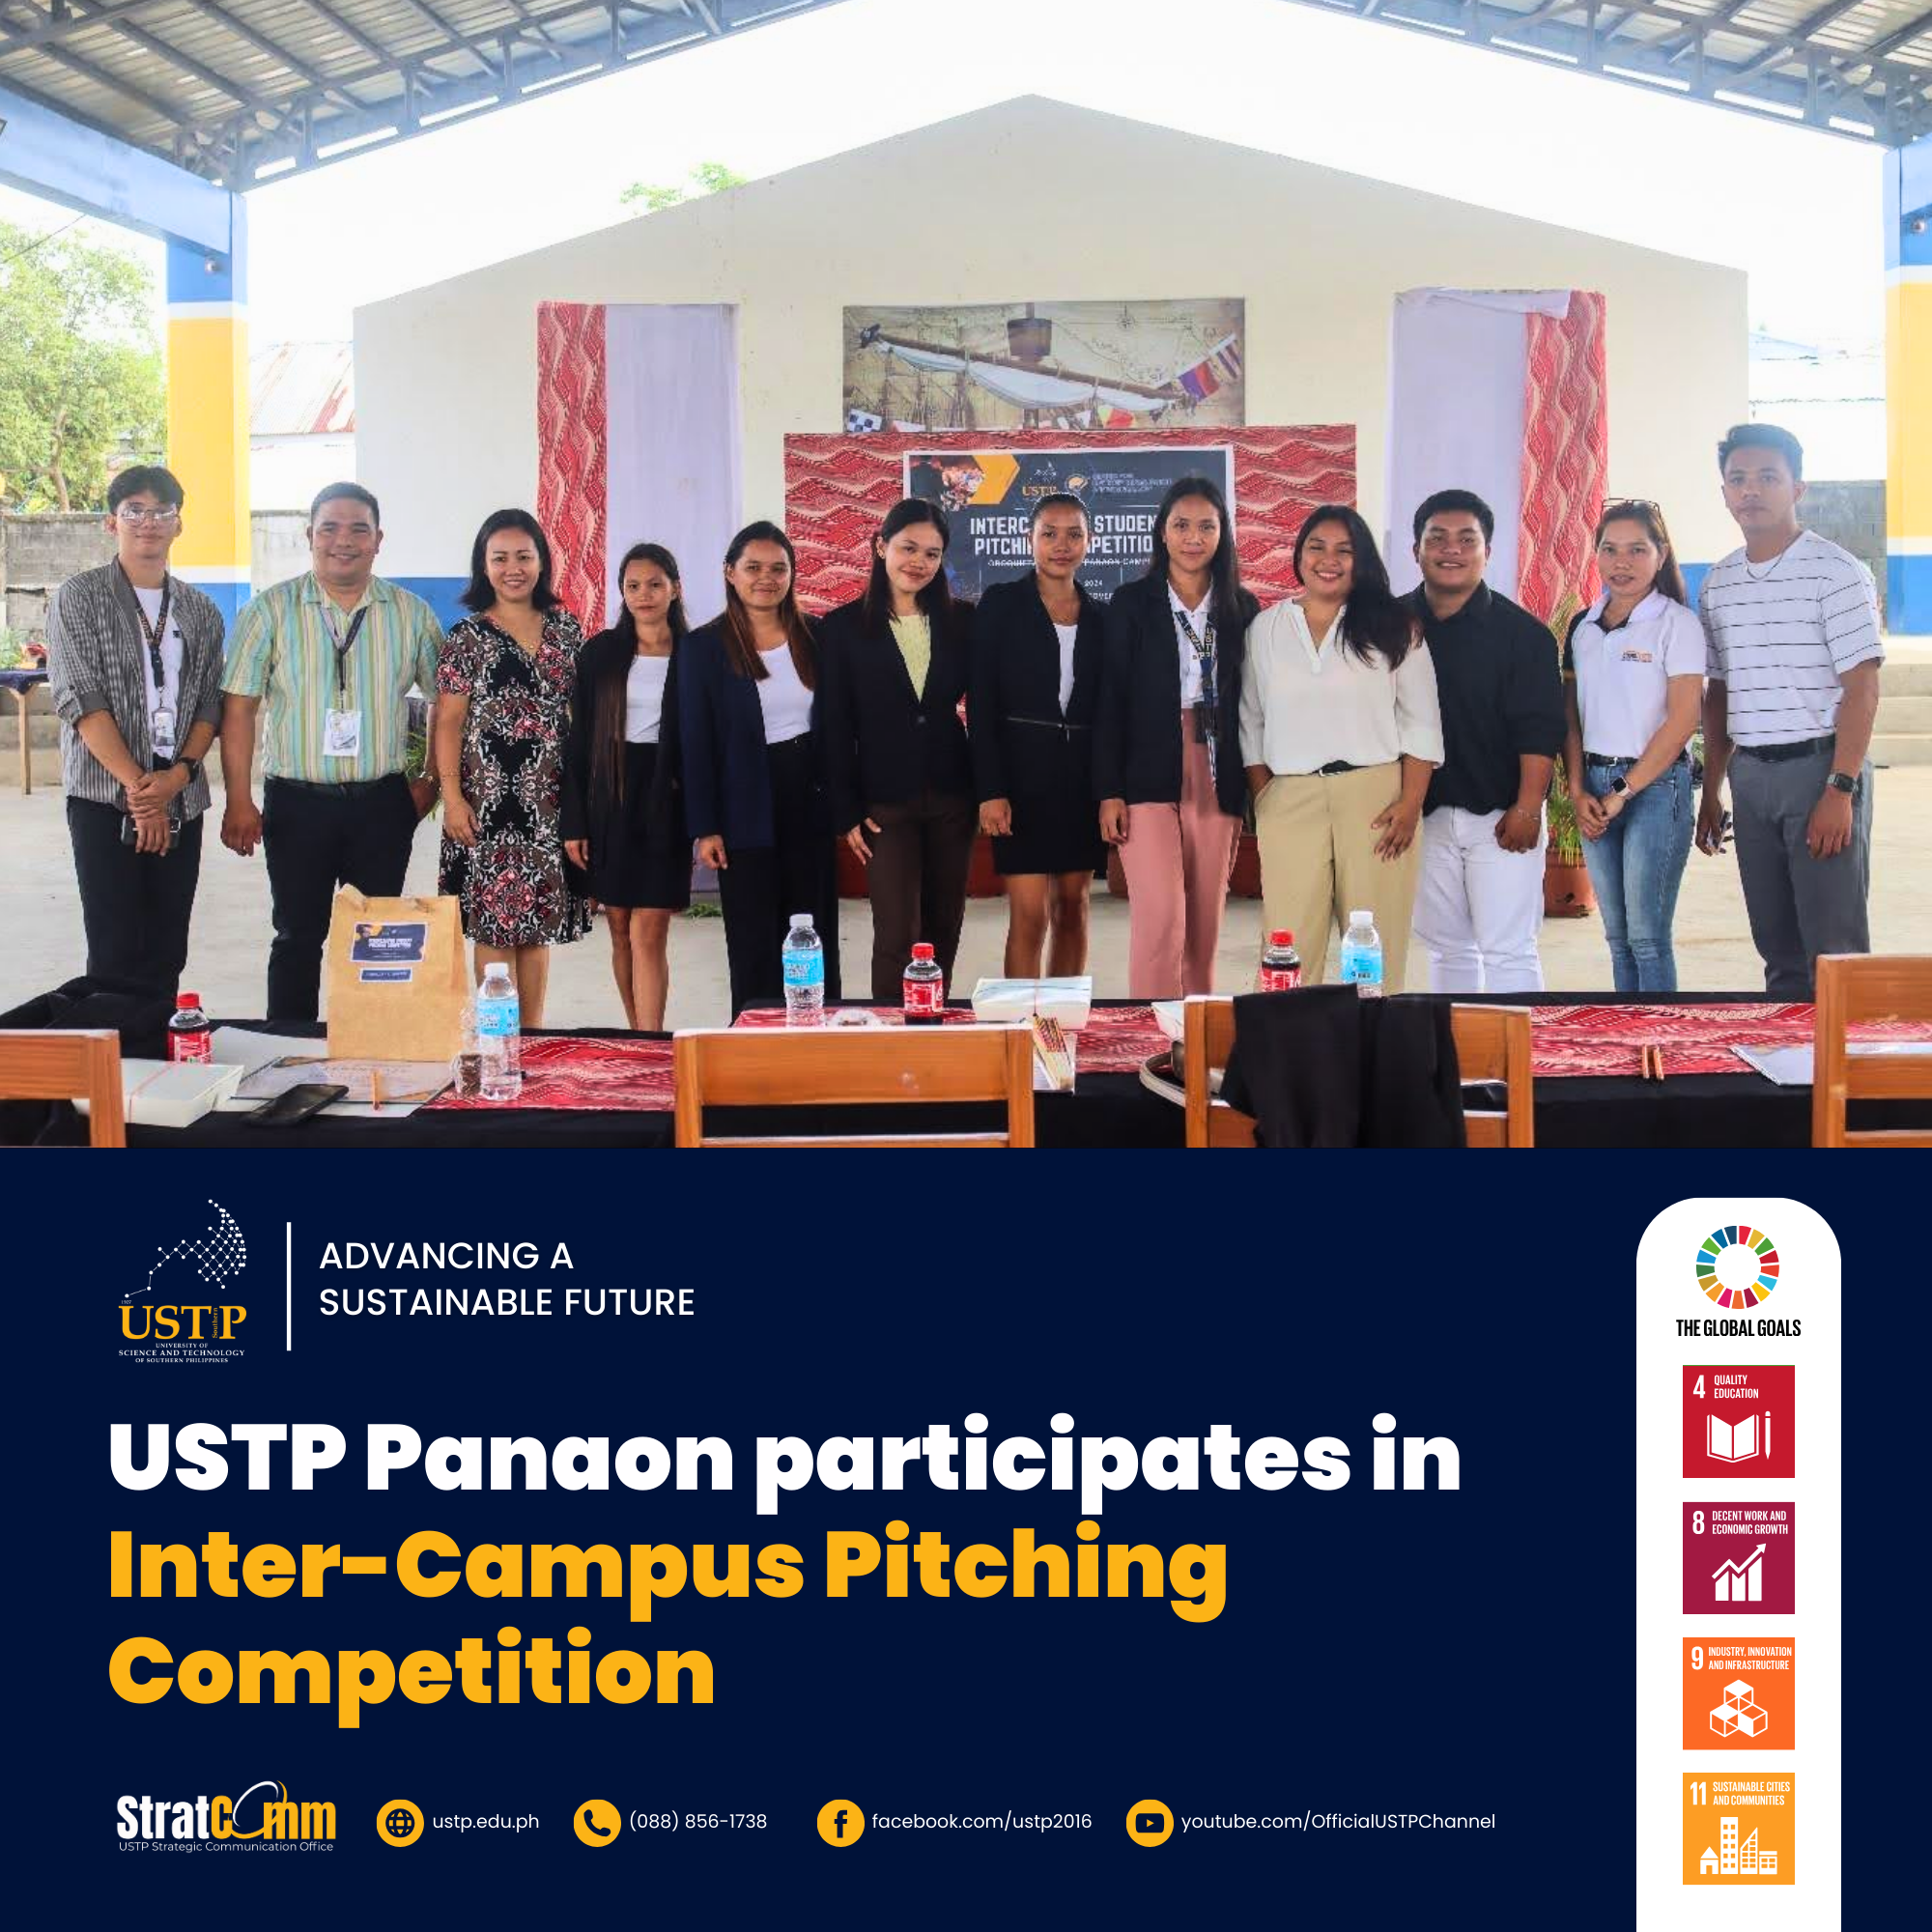 USTP Panaon participates in Inter-Campus Pitching Competition